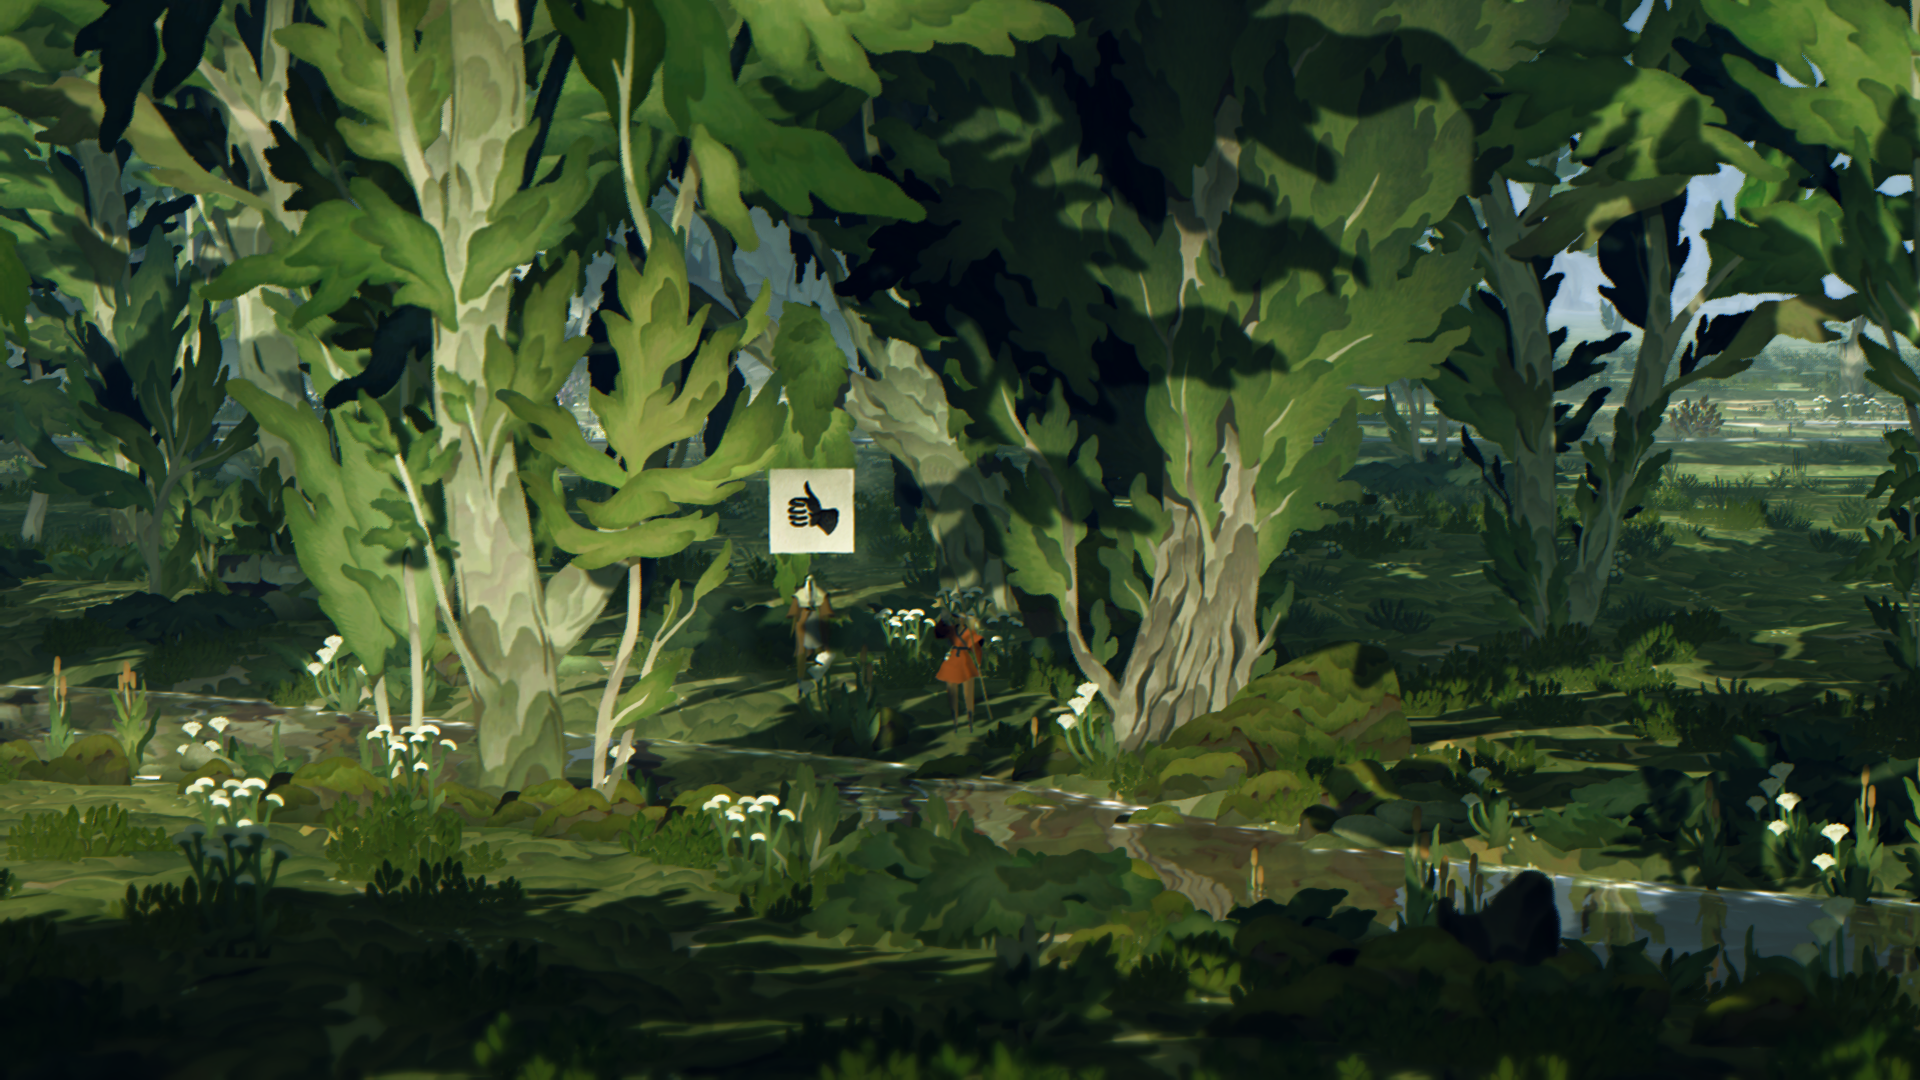 A lively, full daylight image from the game Book of Travels, featuring two characters standing in a lush, green grove. One character is expressing positivity with a thumbs-up emoji, showcasing the interactive and social aspects of the game.